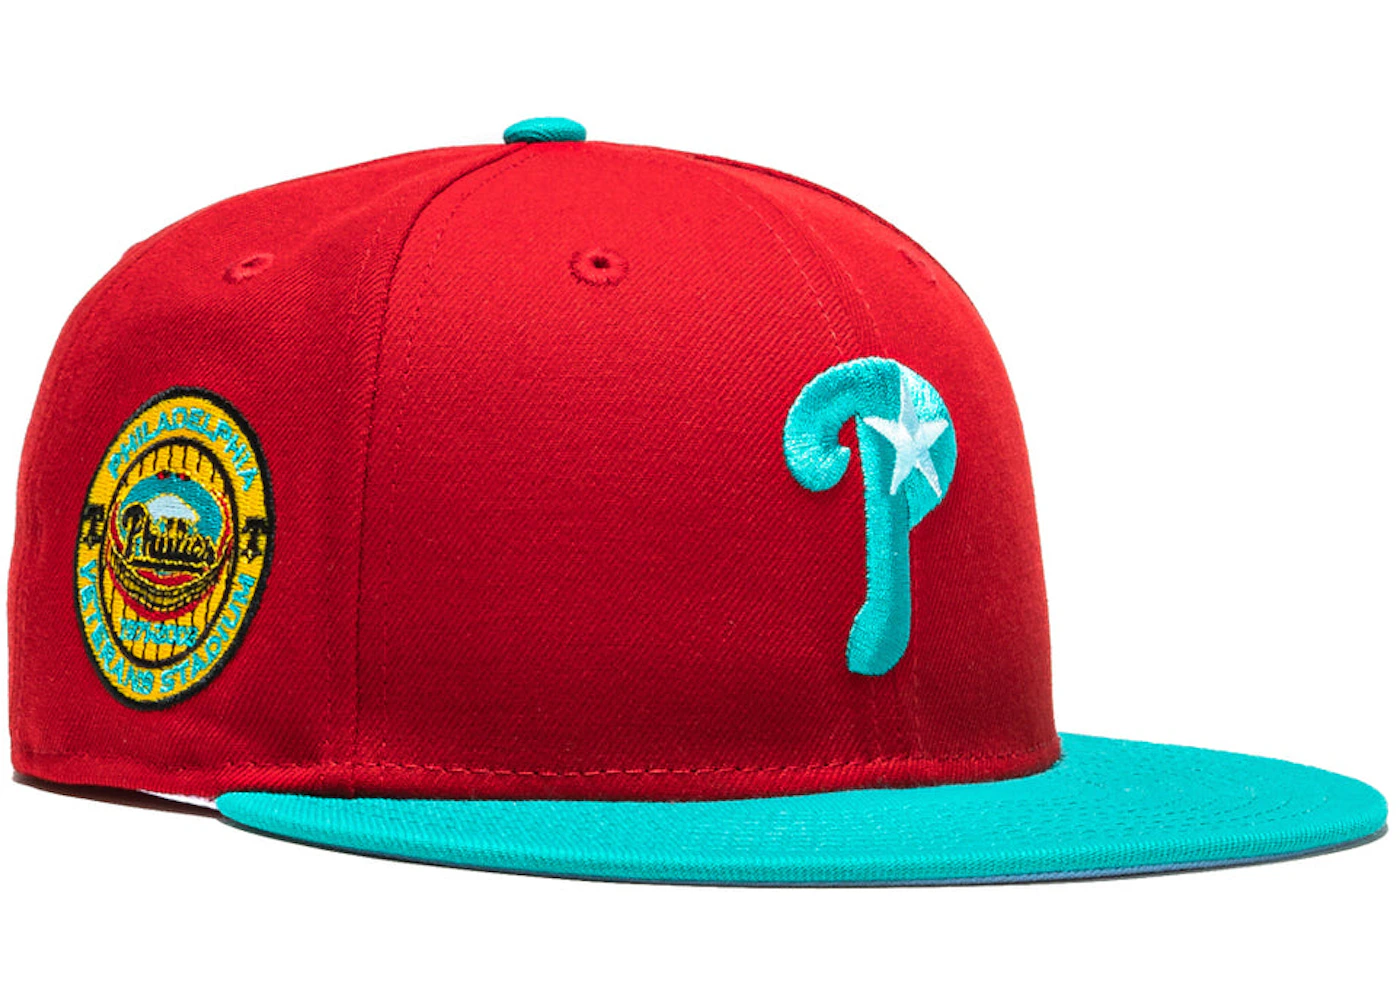 New Era 59FIFTY Captain Planet 2.0 Detroit Tigers 2005 All Star Game Patch Alternate Hat - Red, Teal Red/Teal / 7 1/8